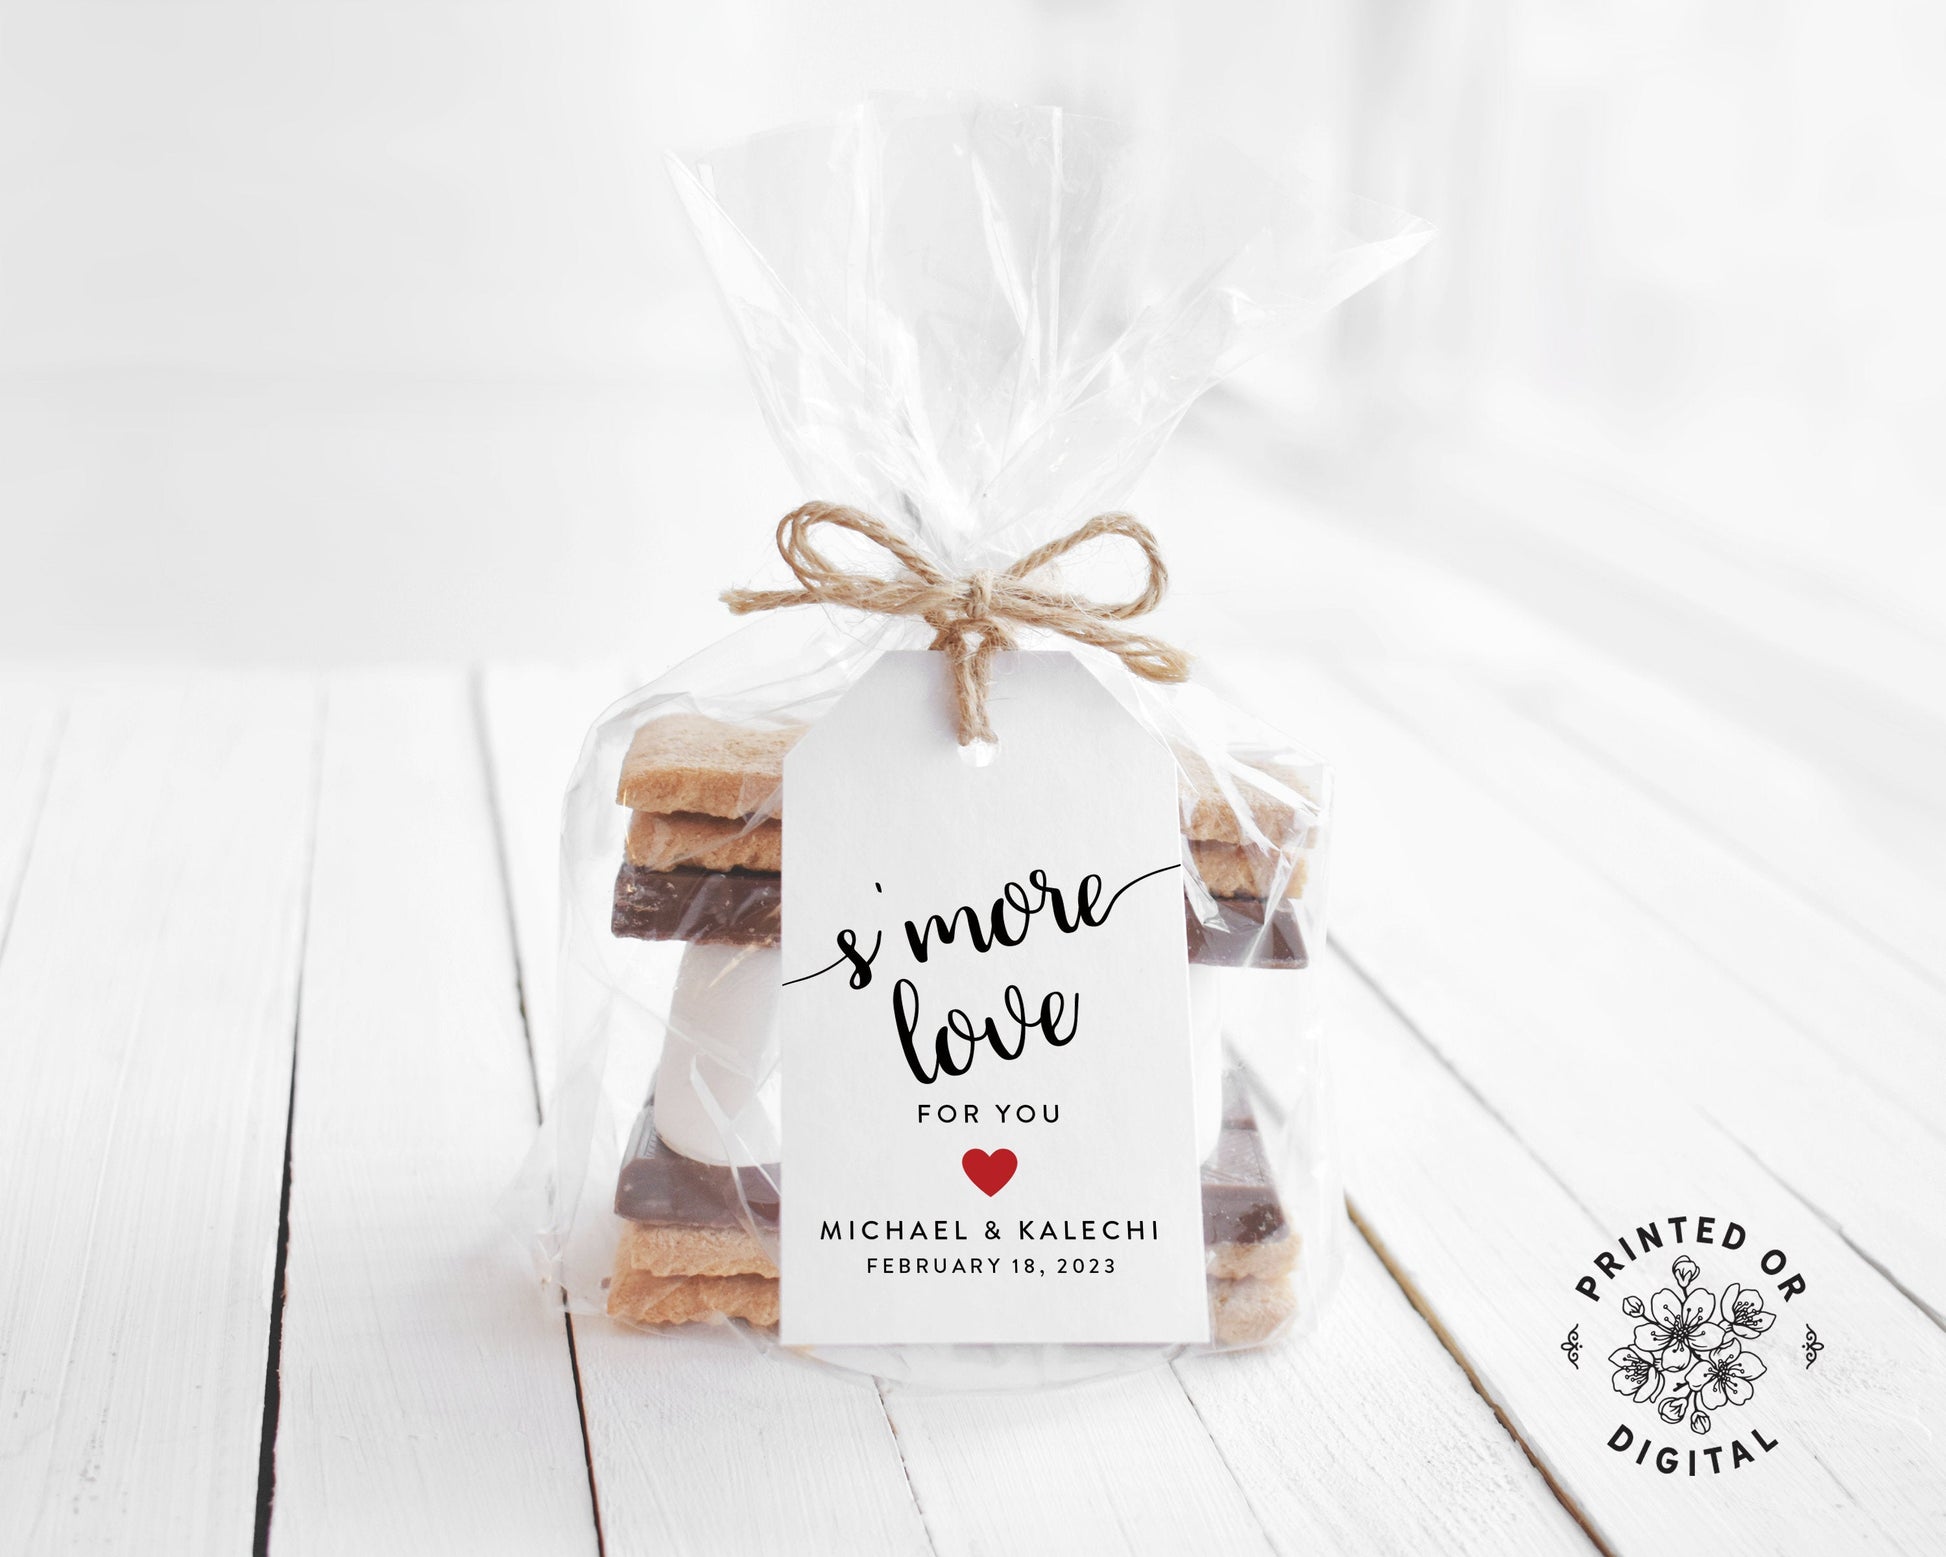 Lux Party’s white s’more love wedding favor tag with black script and a red heart, tied to a clear favor bag of s’mores ingredients.